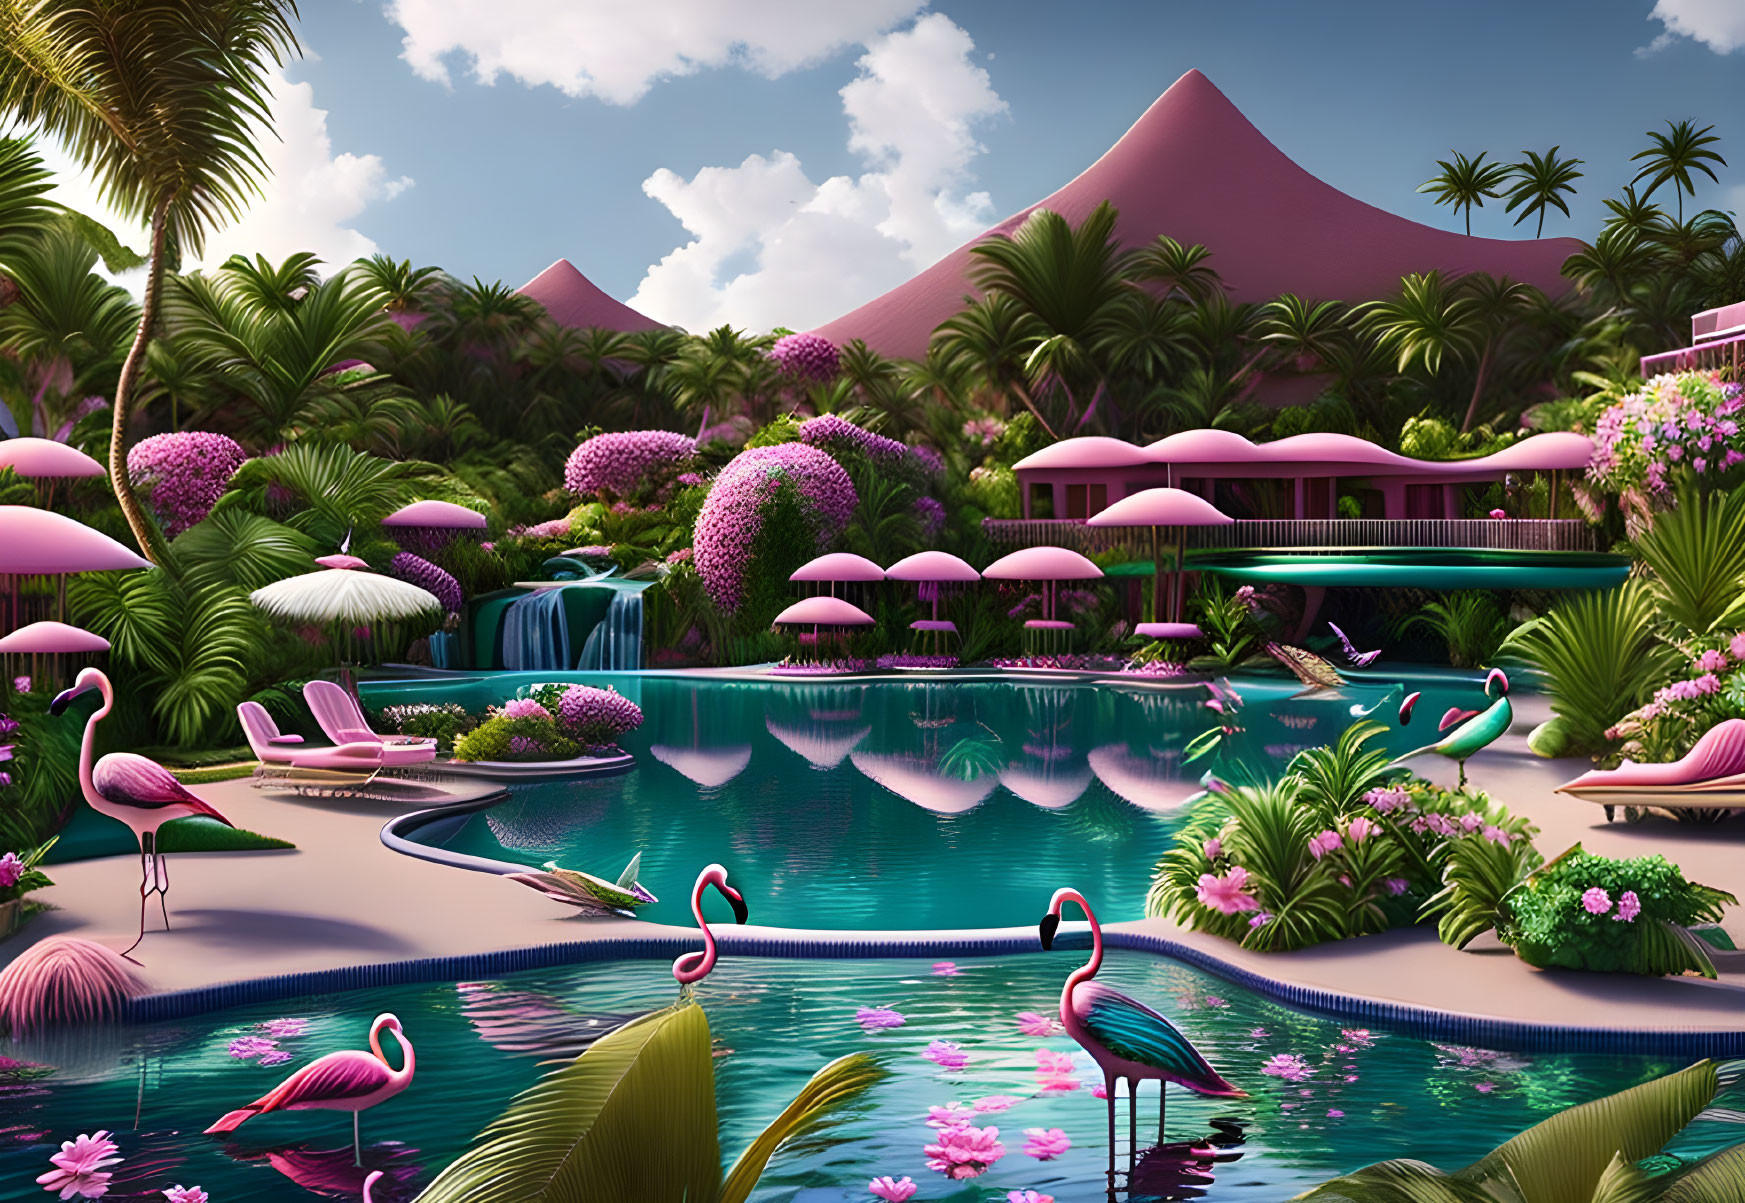 Surreal landscape with pink flamingos, lush greenery, and whimsical architecture